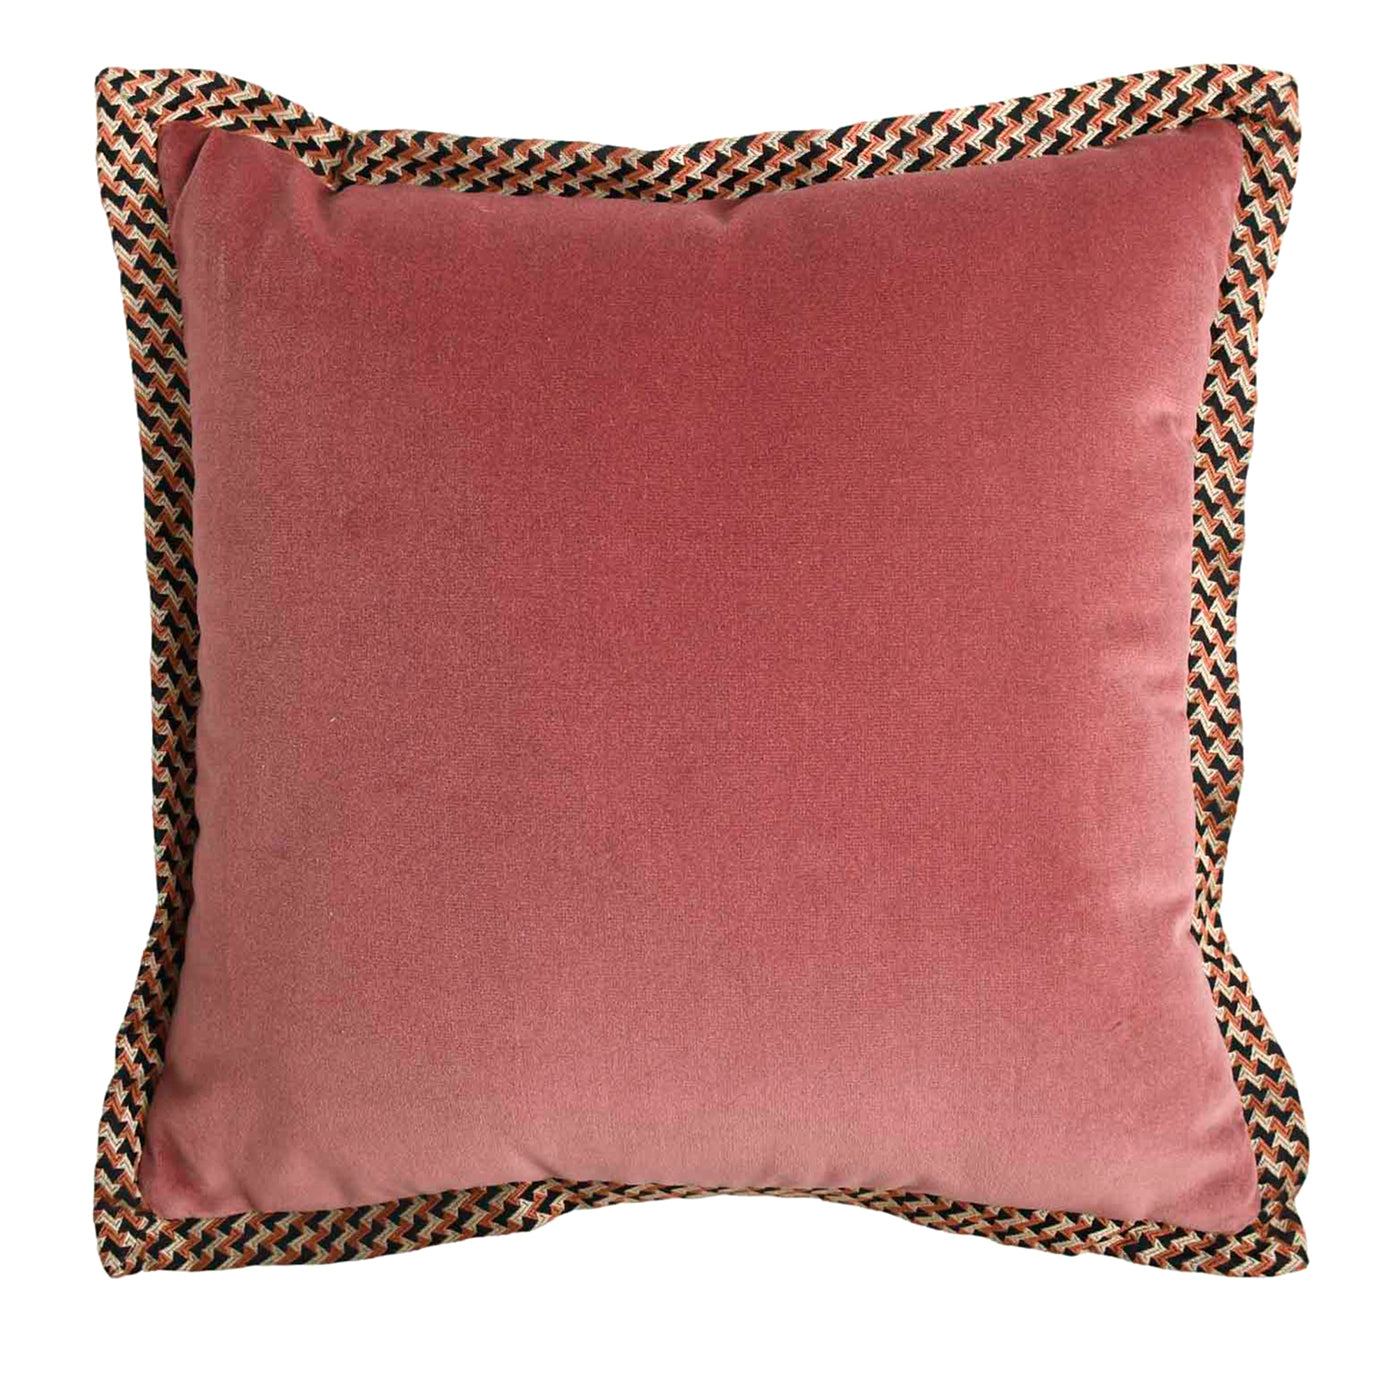 Most Carrè Flat Cushion in cotton velvet and Micro-Patterned jacquard fabric - Main view